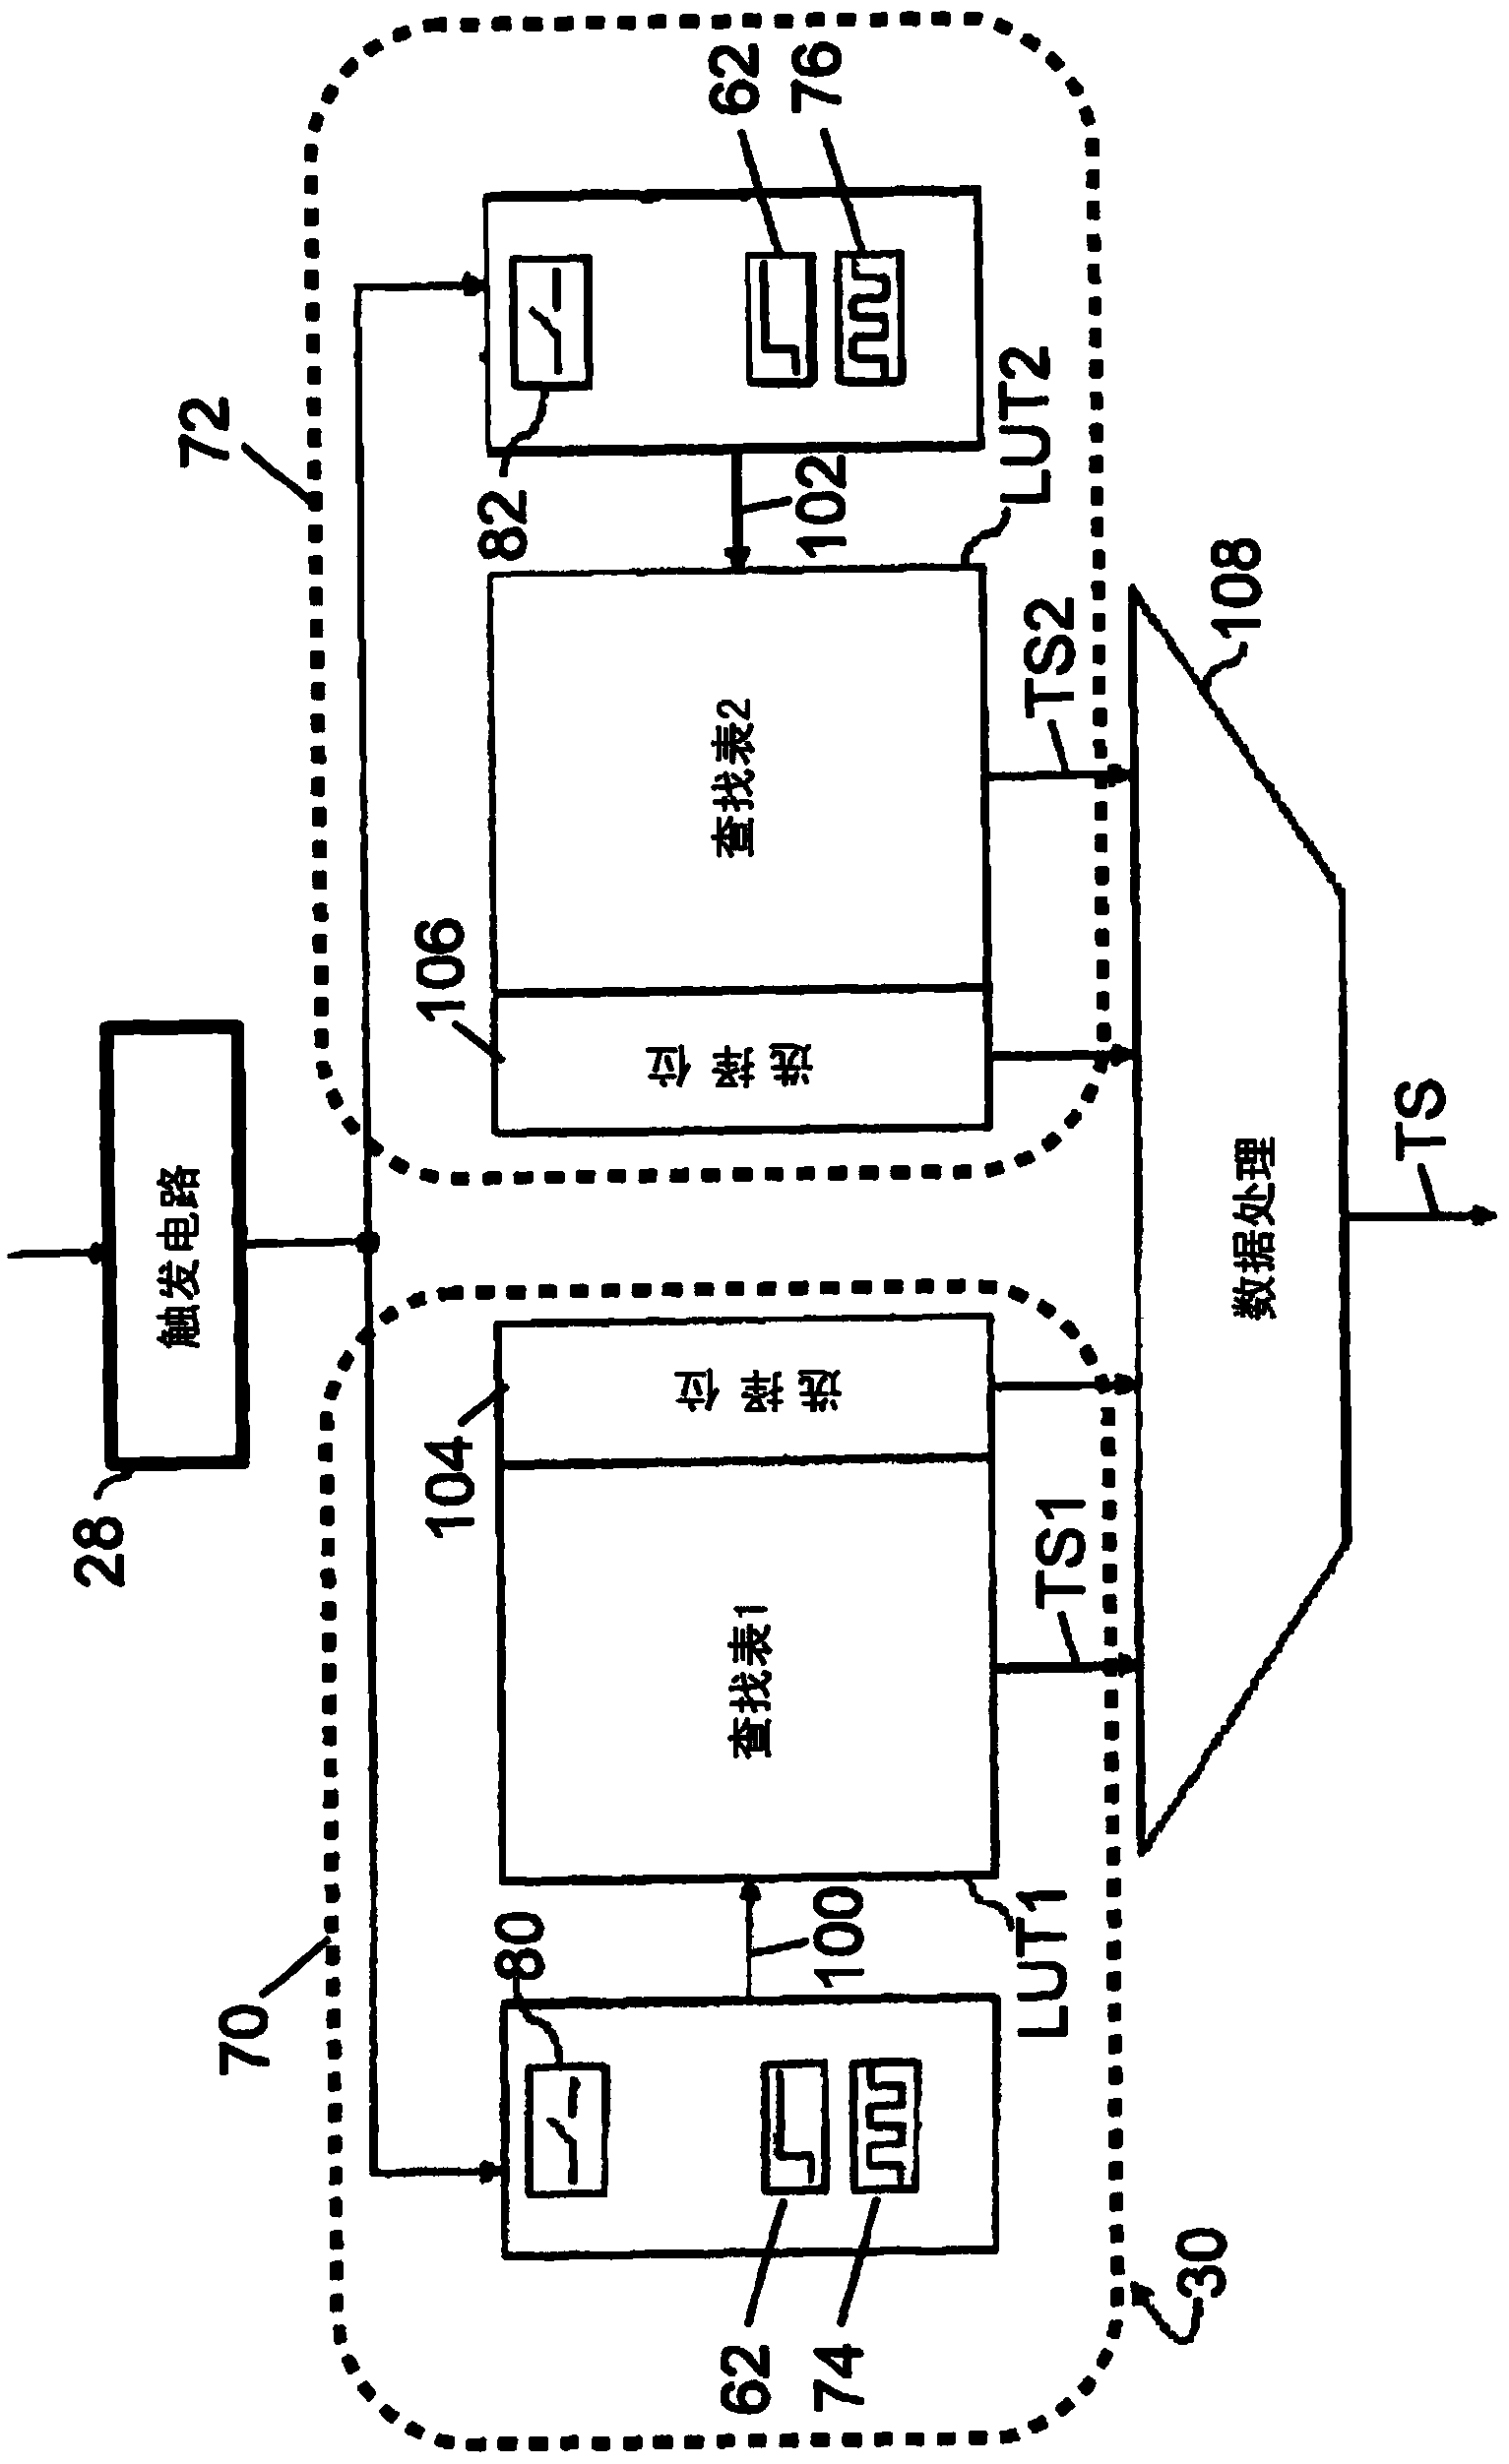 Detector array with time-to-digital conversion having improved temporal accuracy